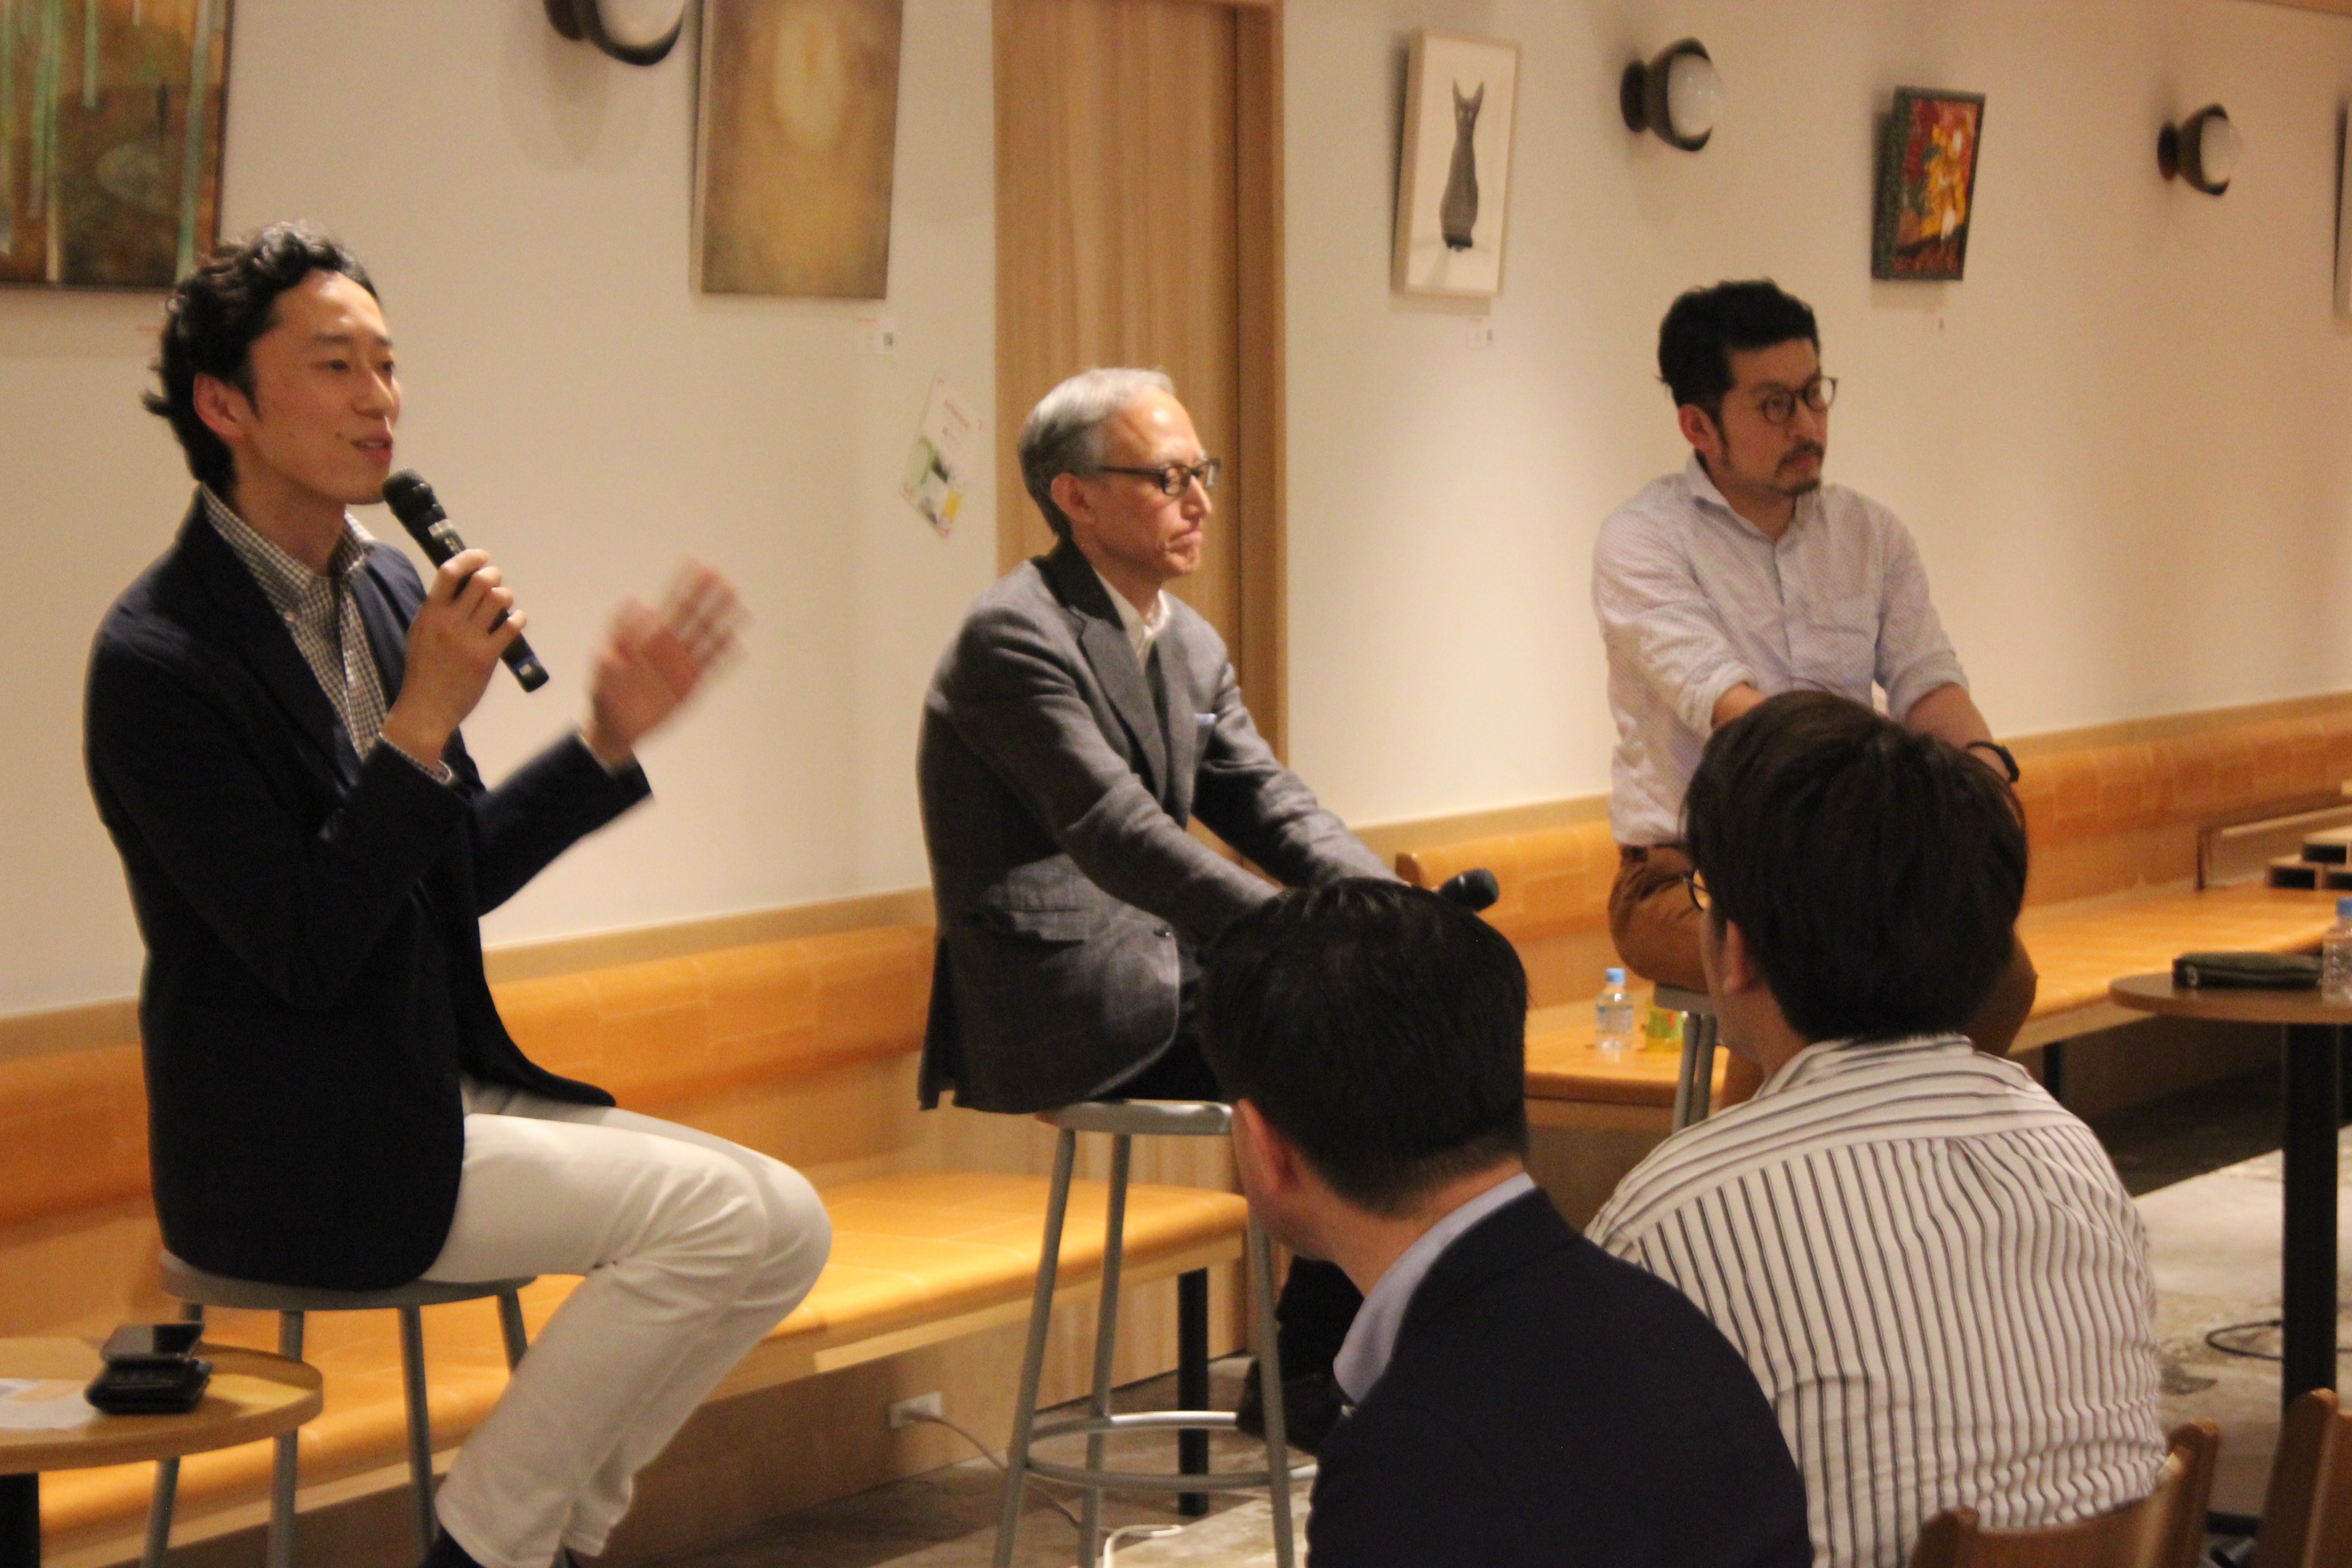 Tadaaki Kimura (left), the CEO and founder of event co-organizer addlight Inc., was the panel discussion moderator at addlight's event series Startup Innovation.